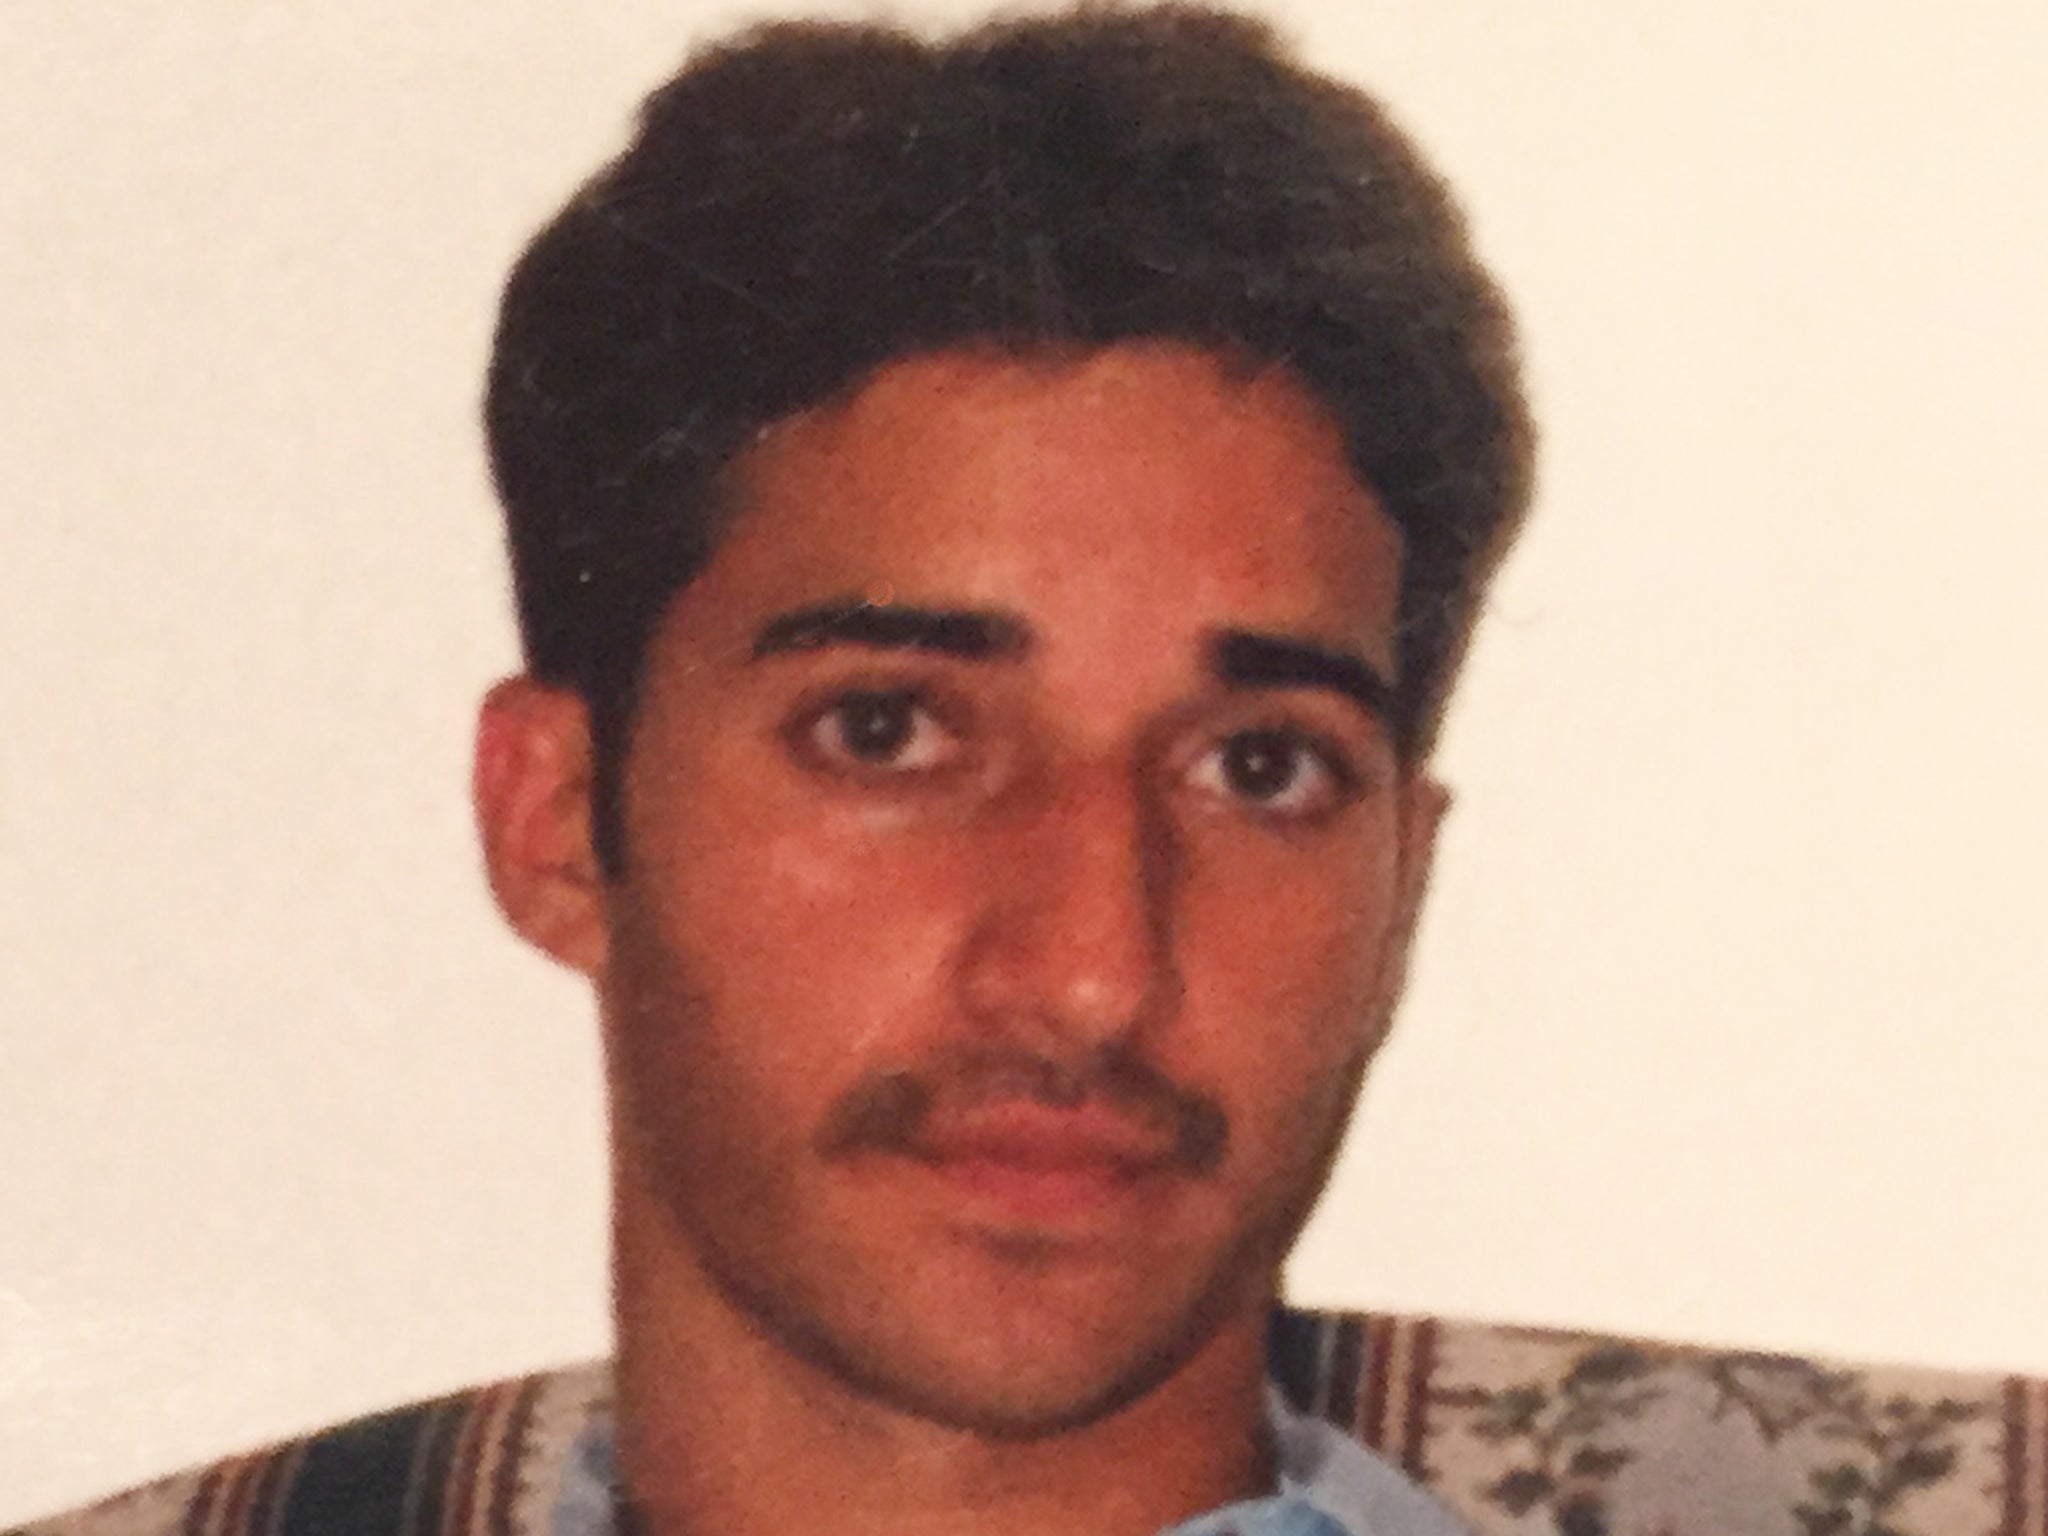 Adnan Syed is serving life in prison for the murder of his girlfriend Hae Min Lee in 1999